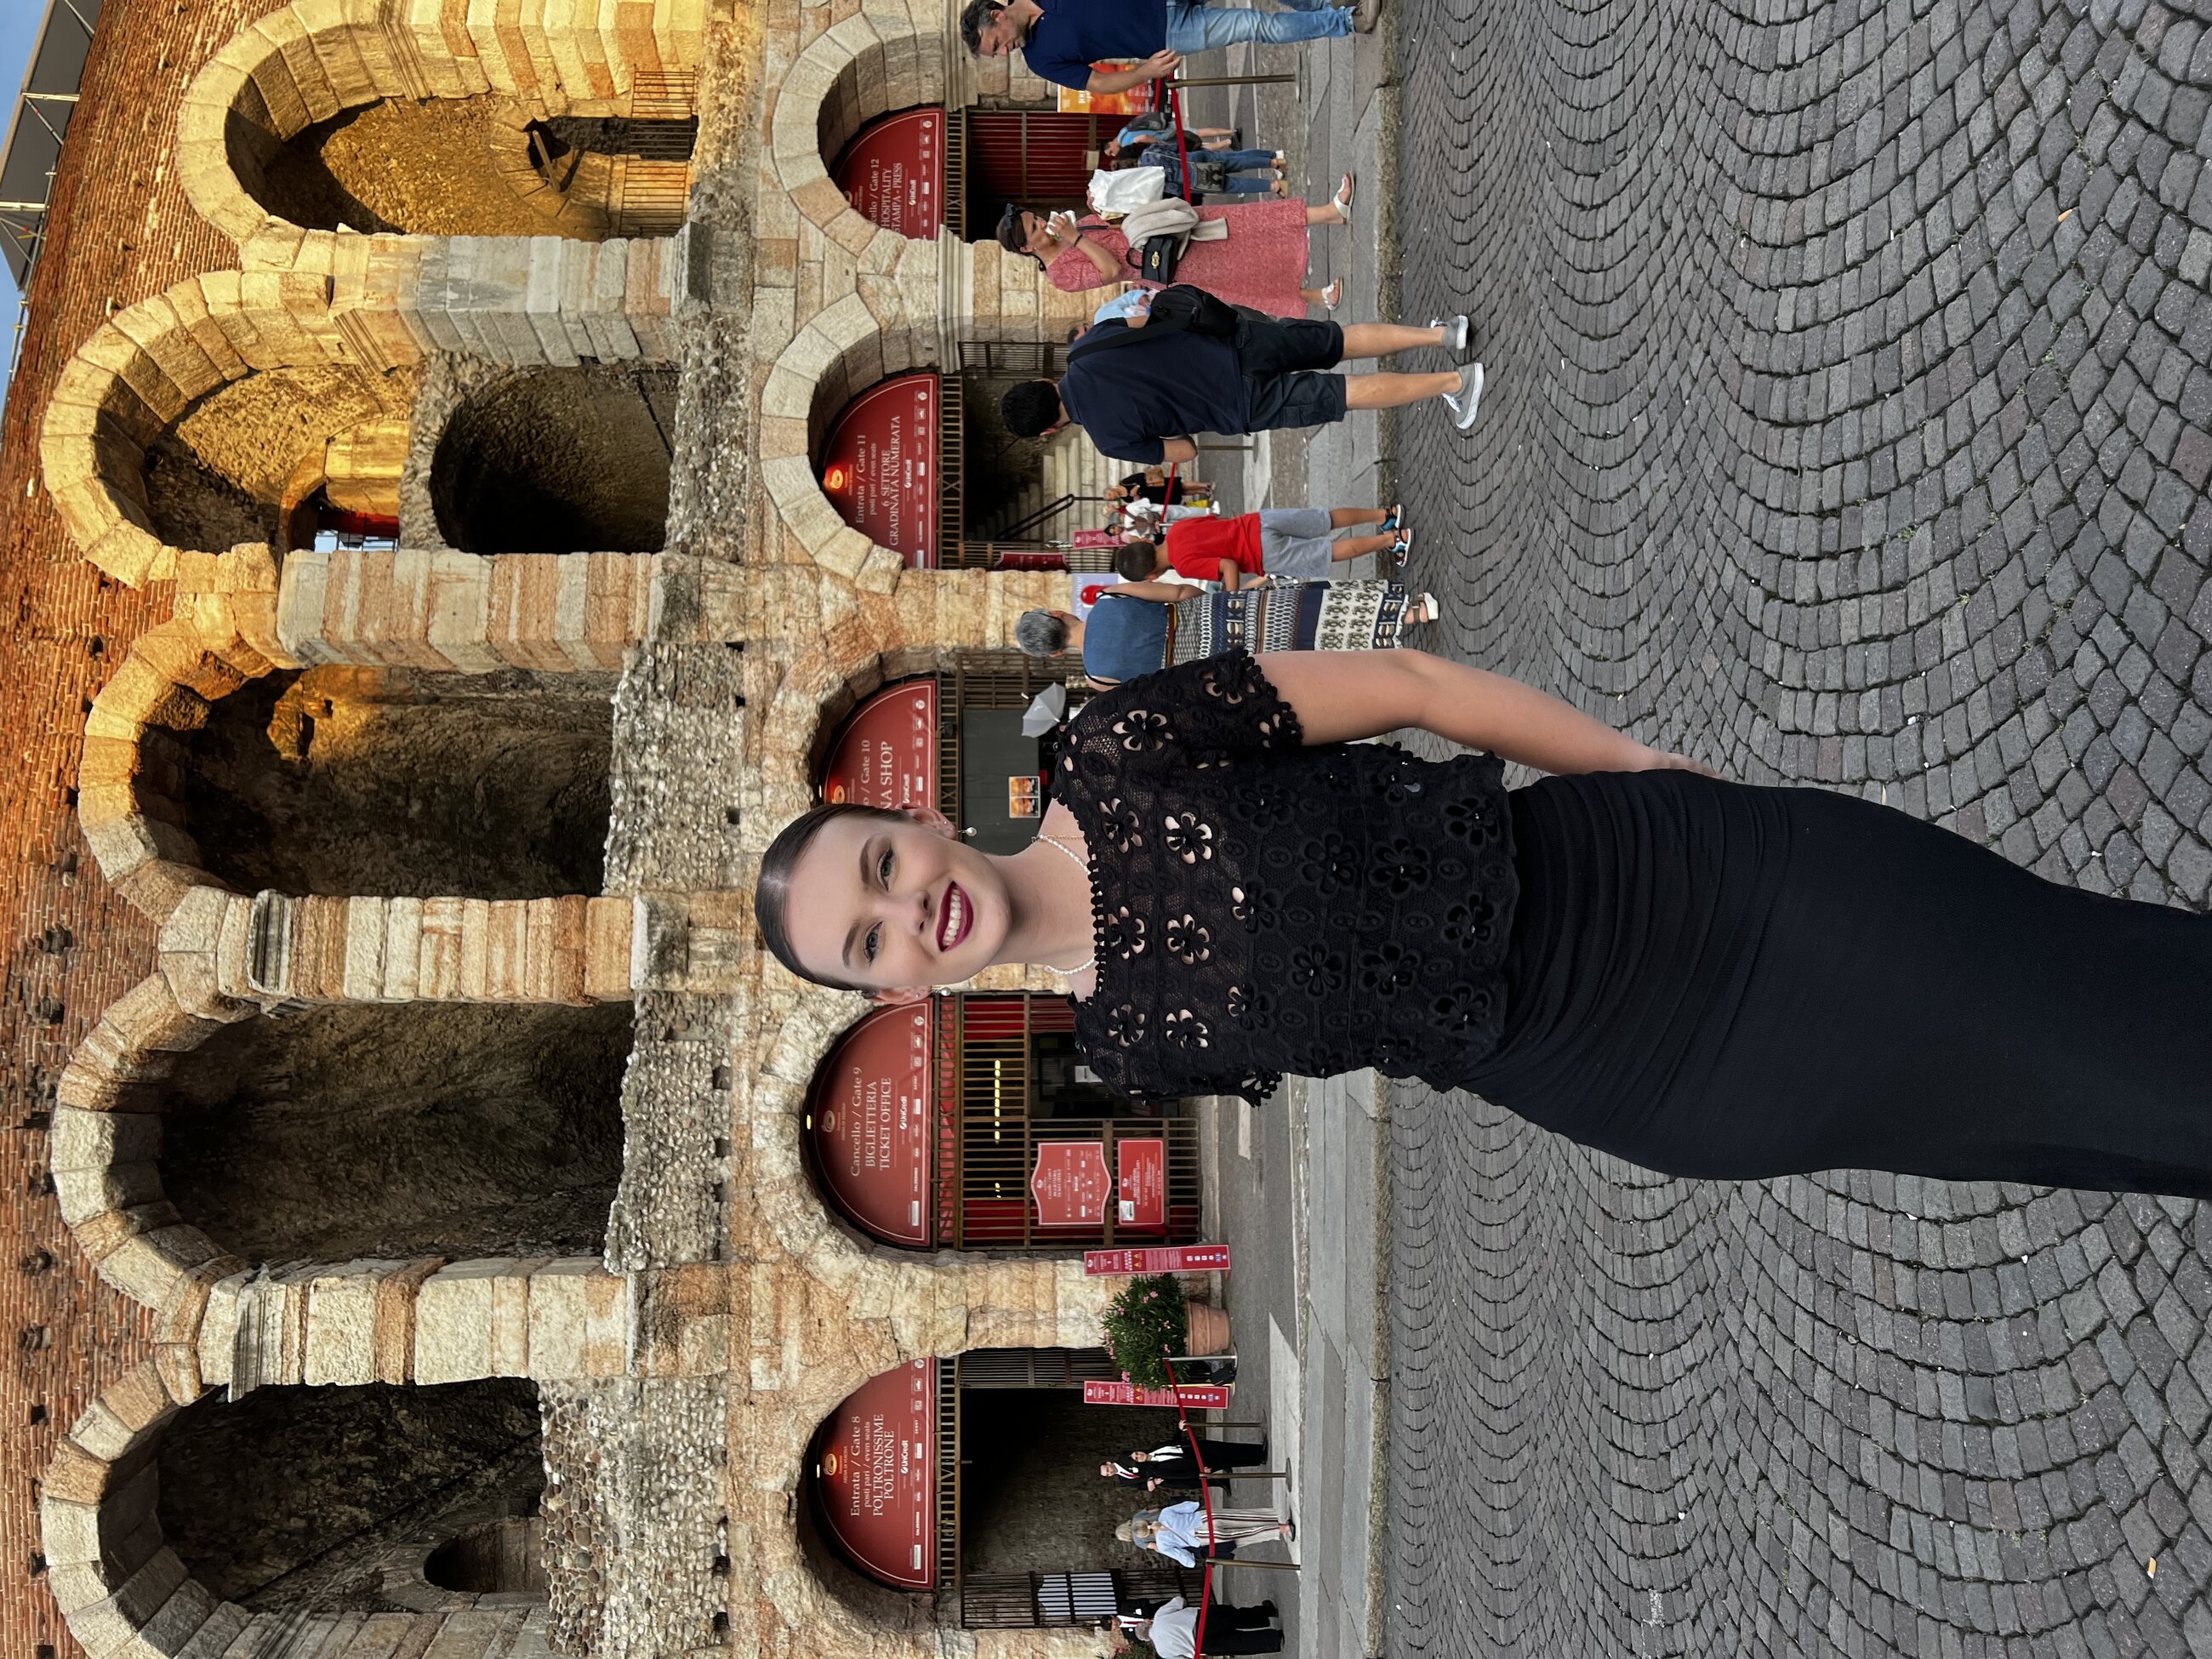 Dressed up for a night at the opera at Verona's ancient Roman arena